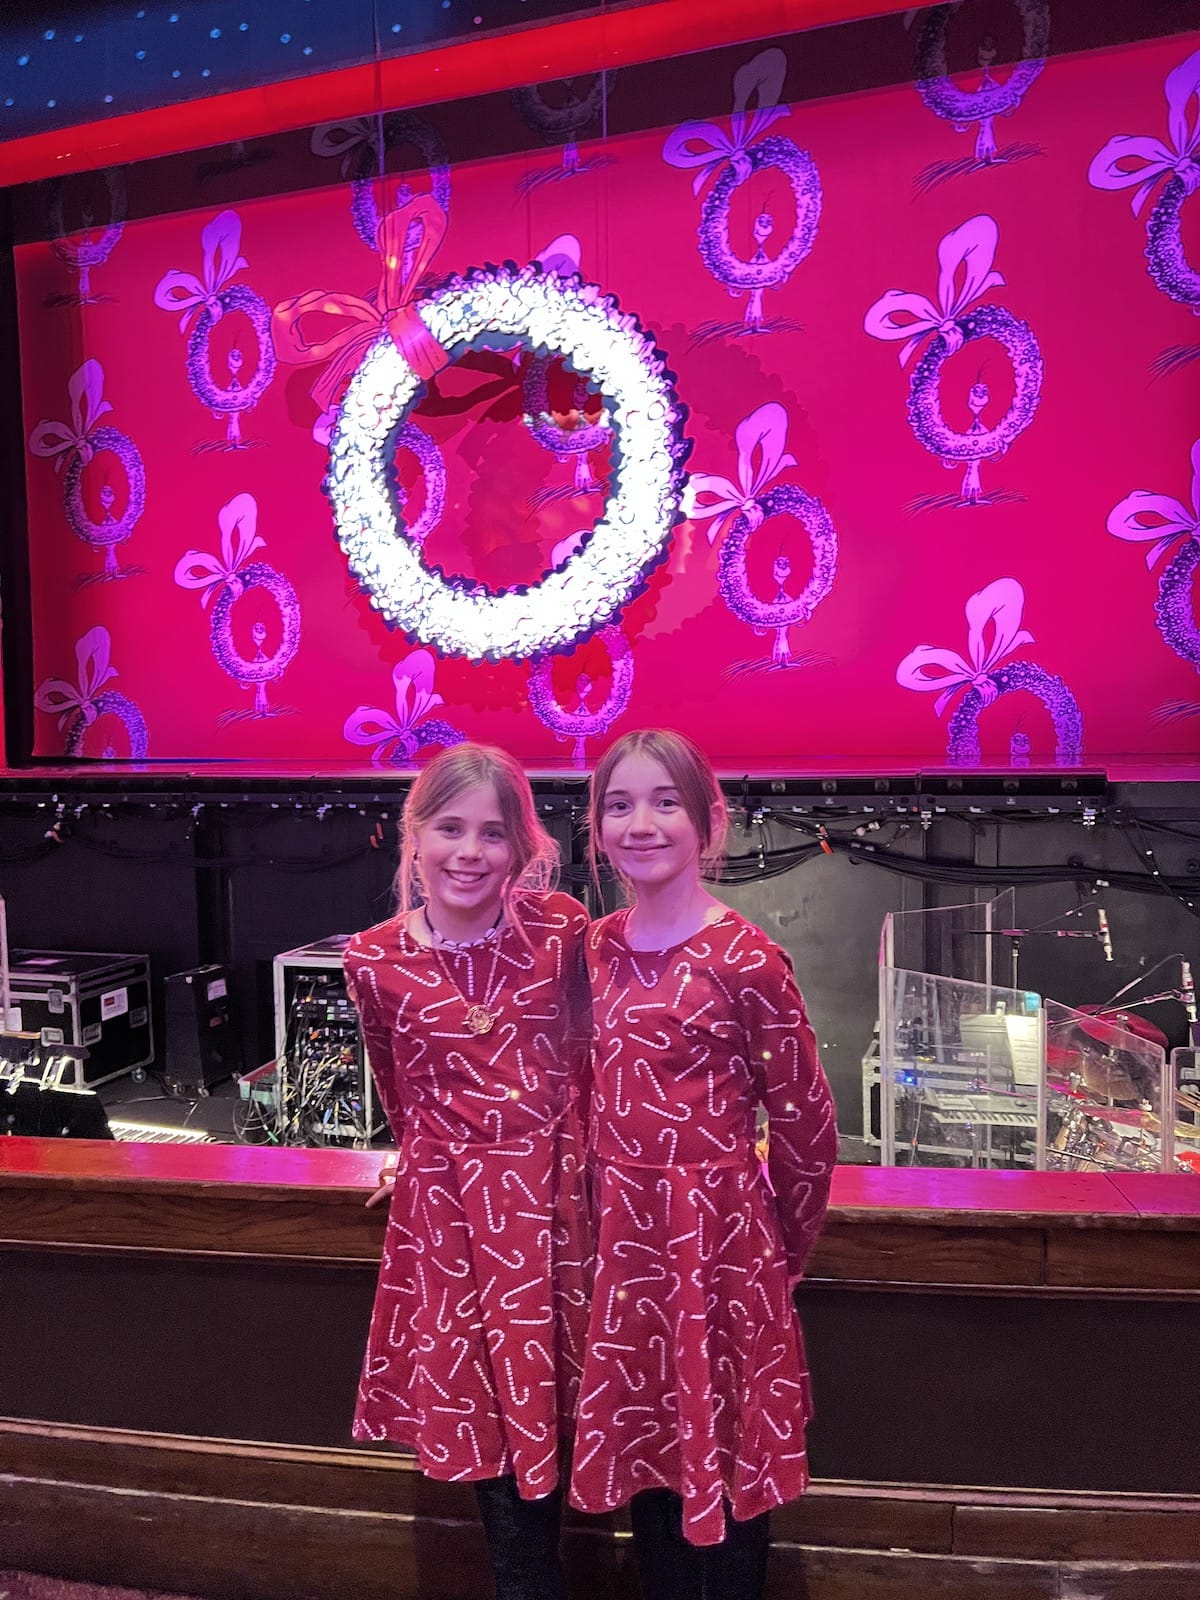 Dr. Seuss How the Grinch Stole Christmas The Musical What to Expect at the holiday festive show! Our girl's night in Atlanta